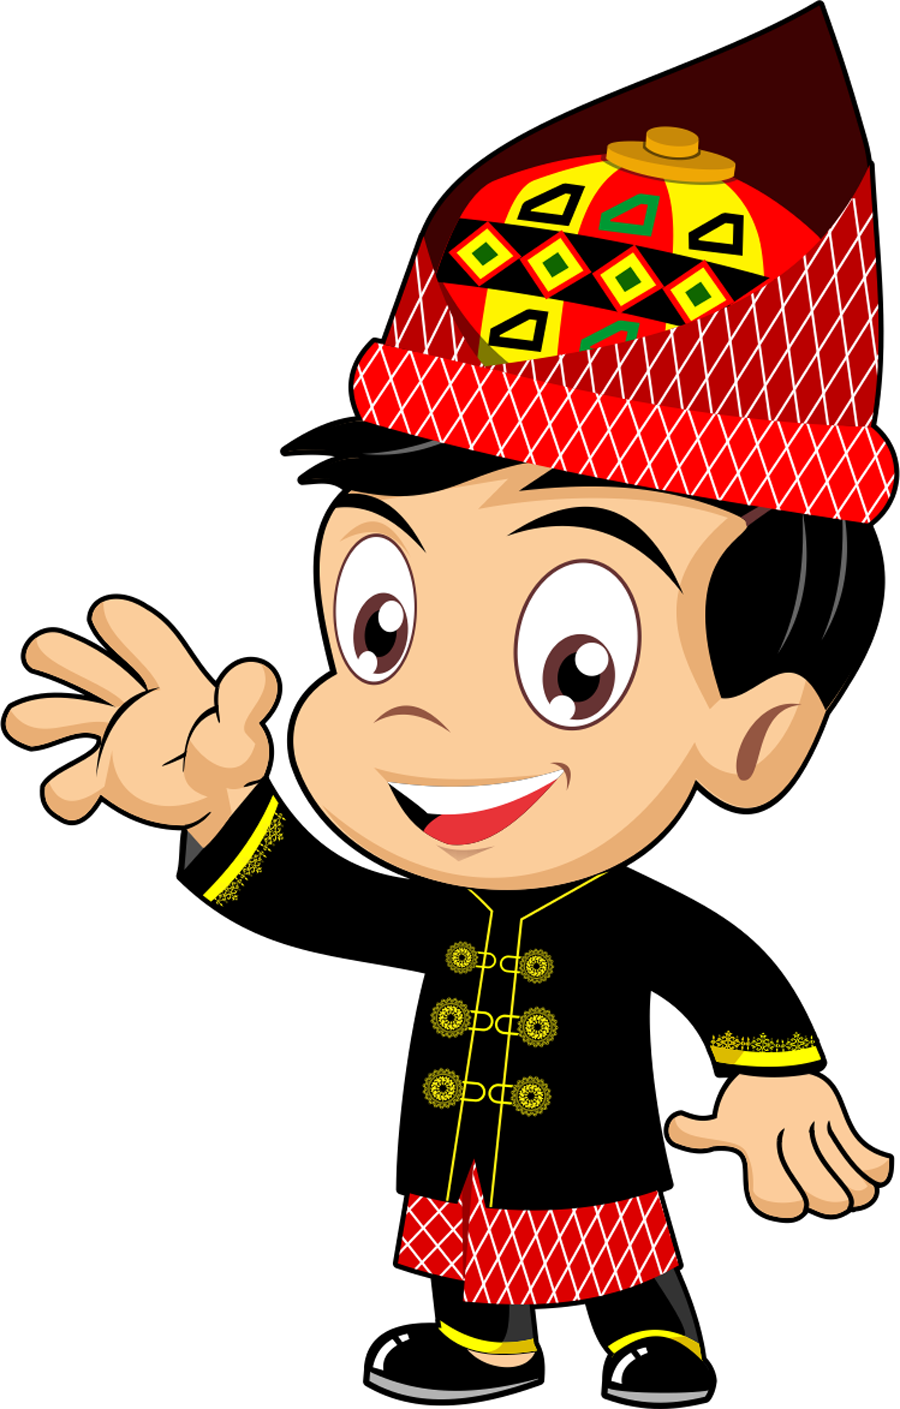 Aceh Art Rumah Adat Animation Happiness PNG Image